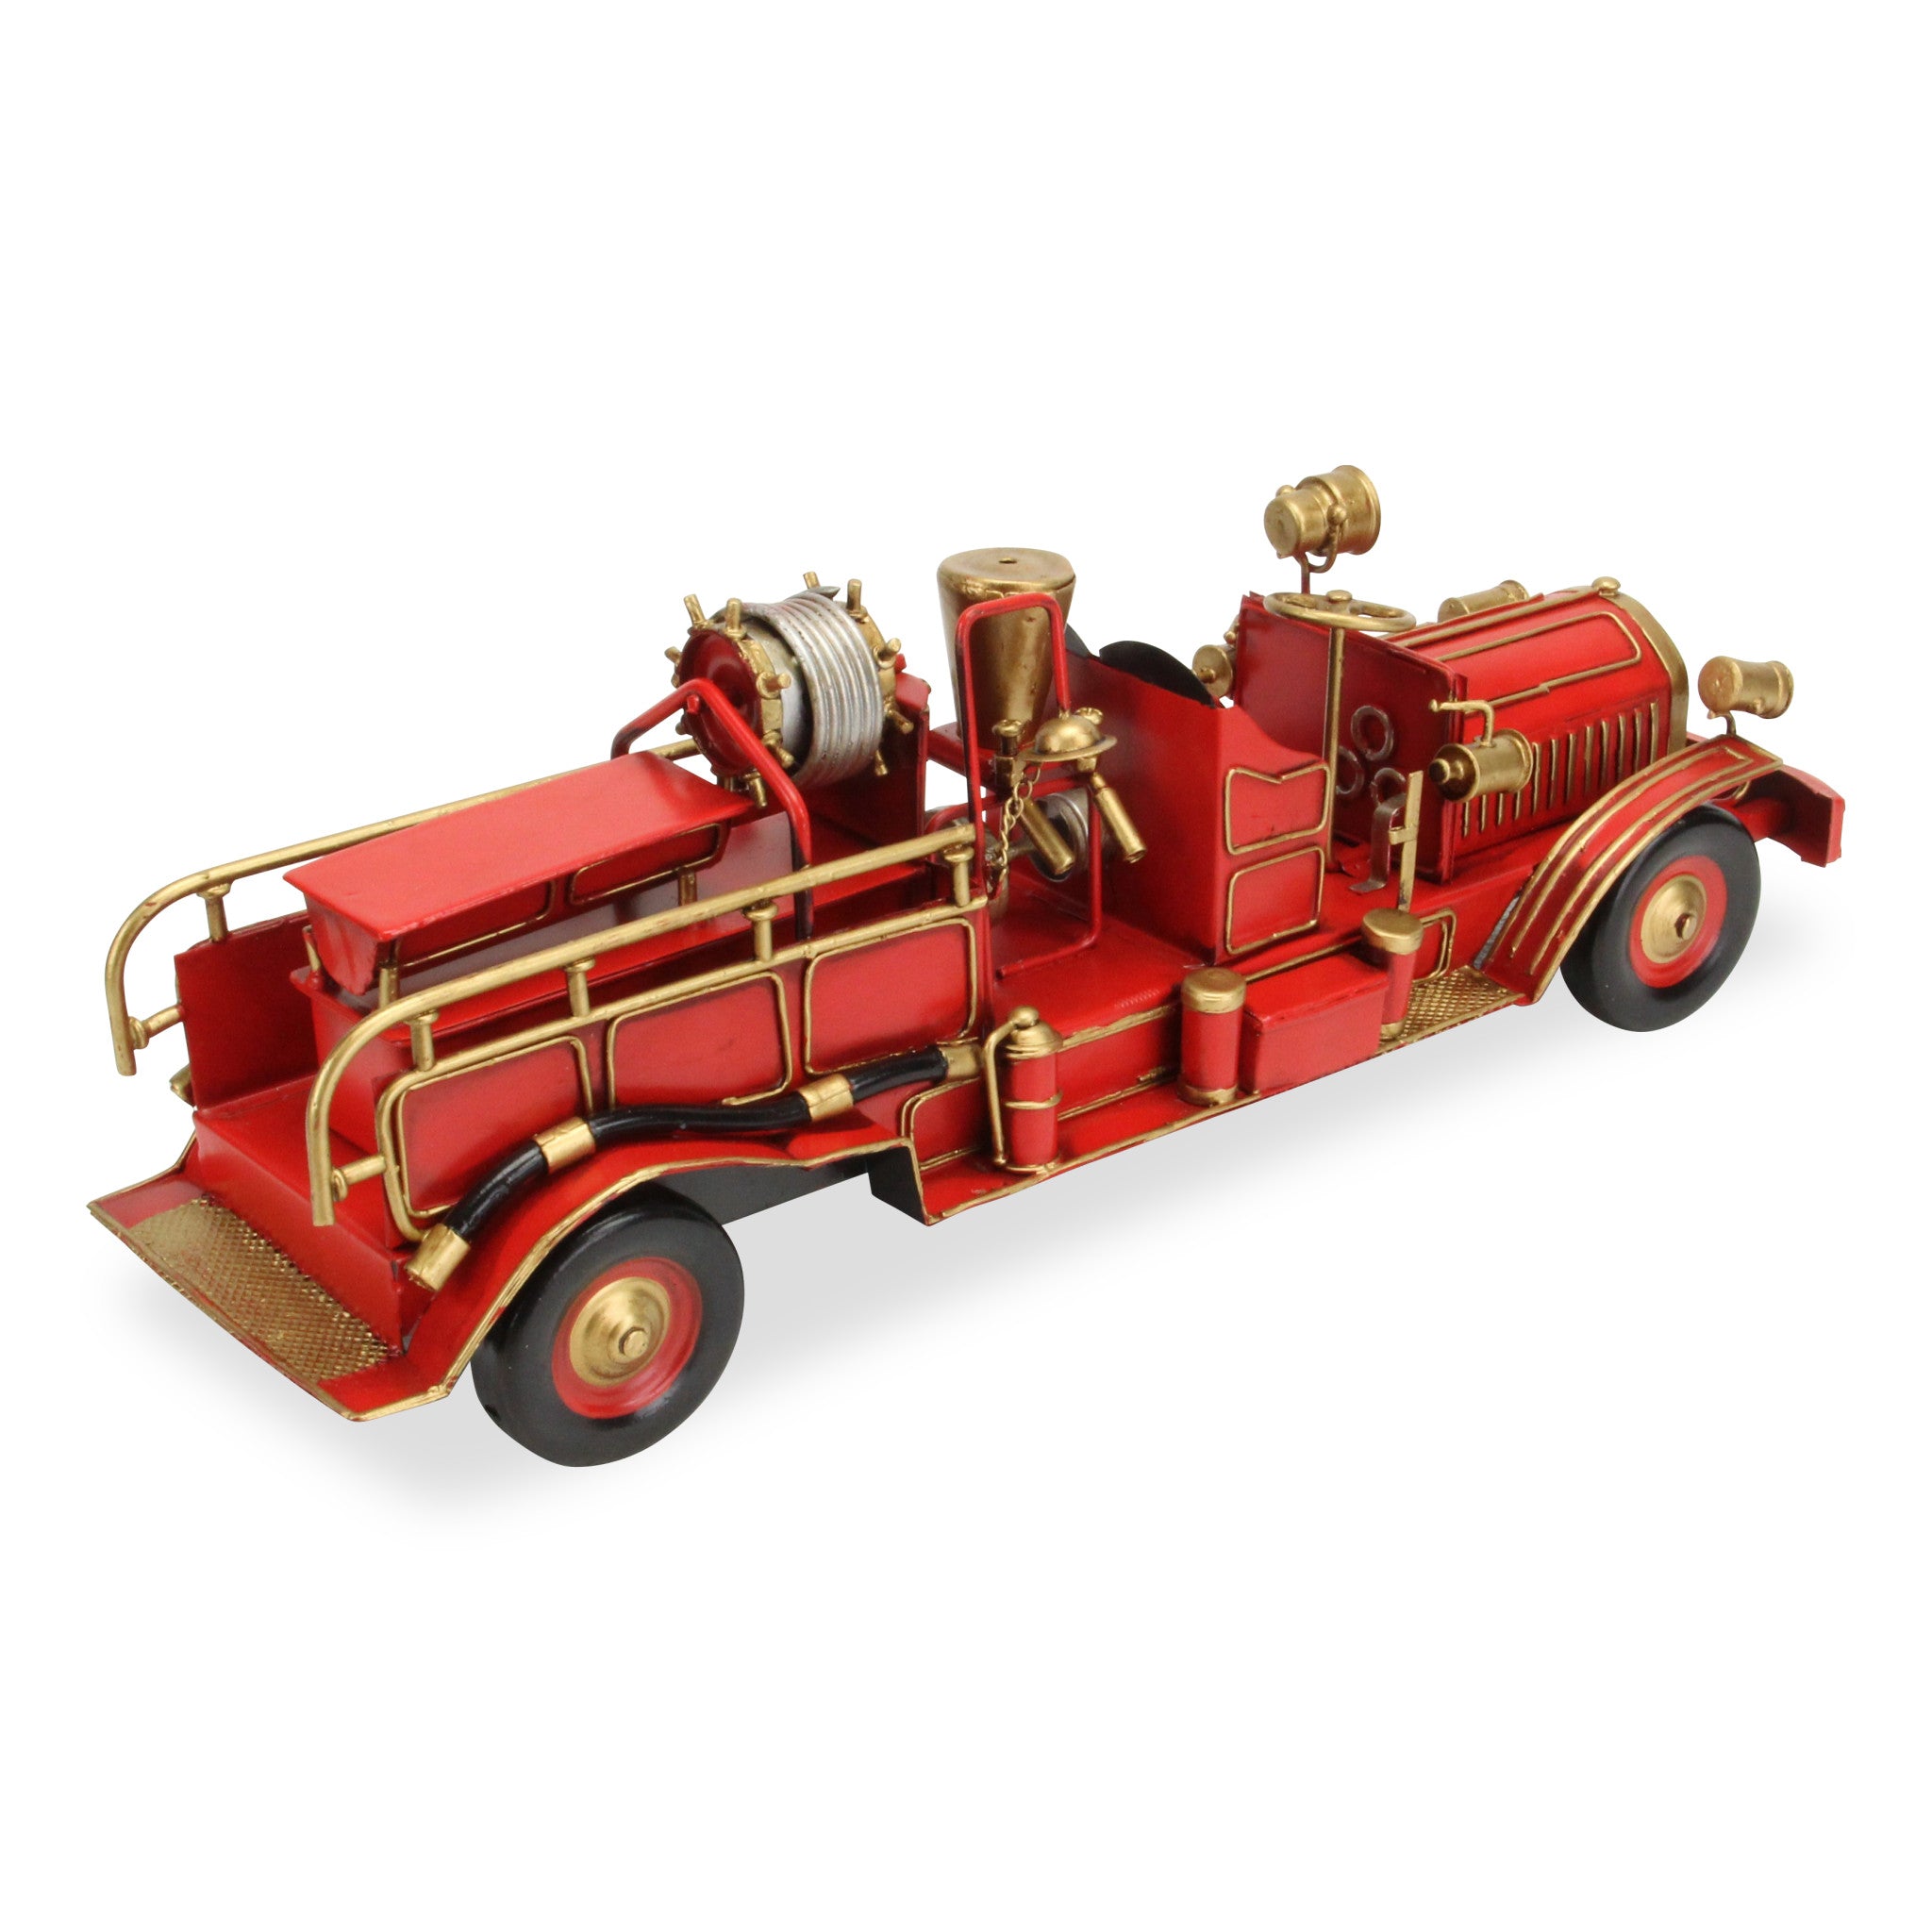 6" Red and Gold Metal Hand Painted Model Car